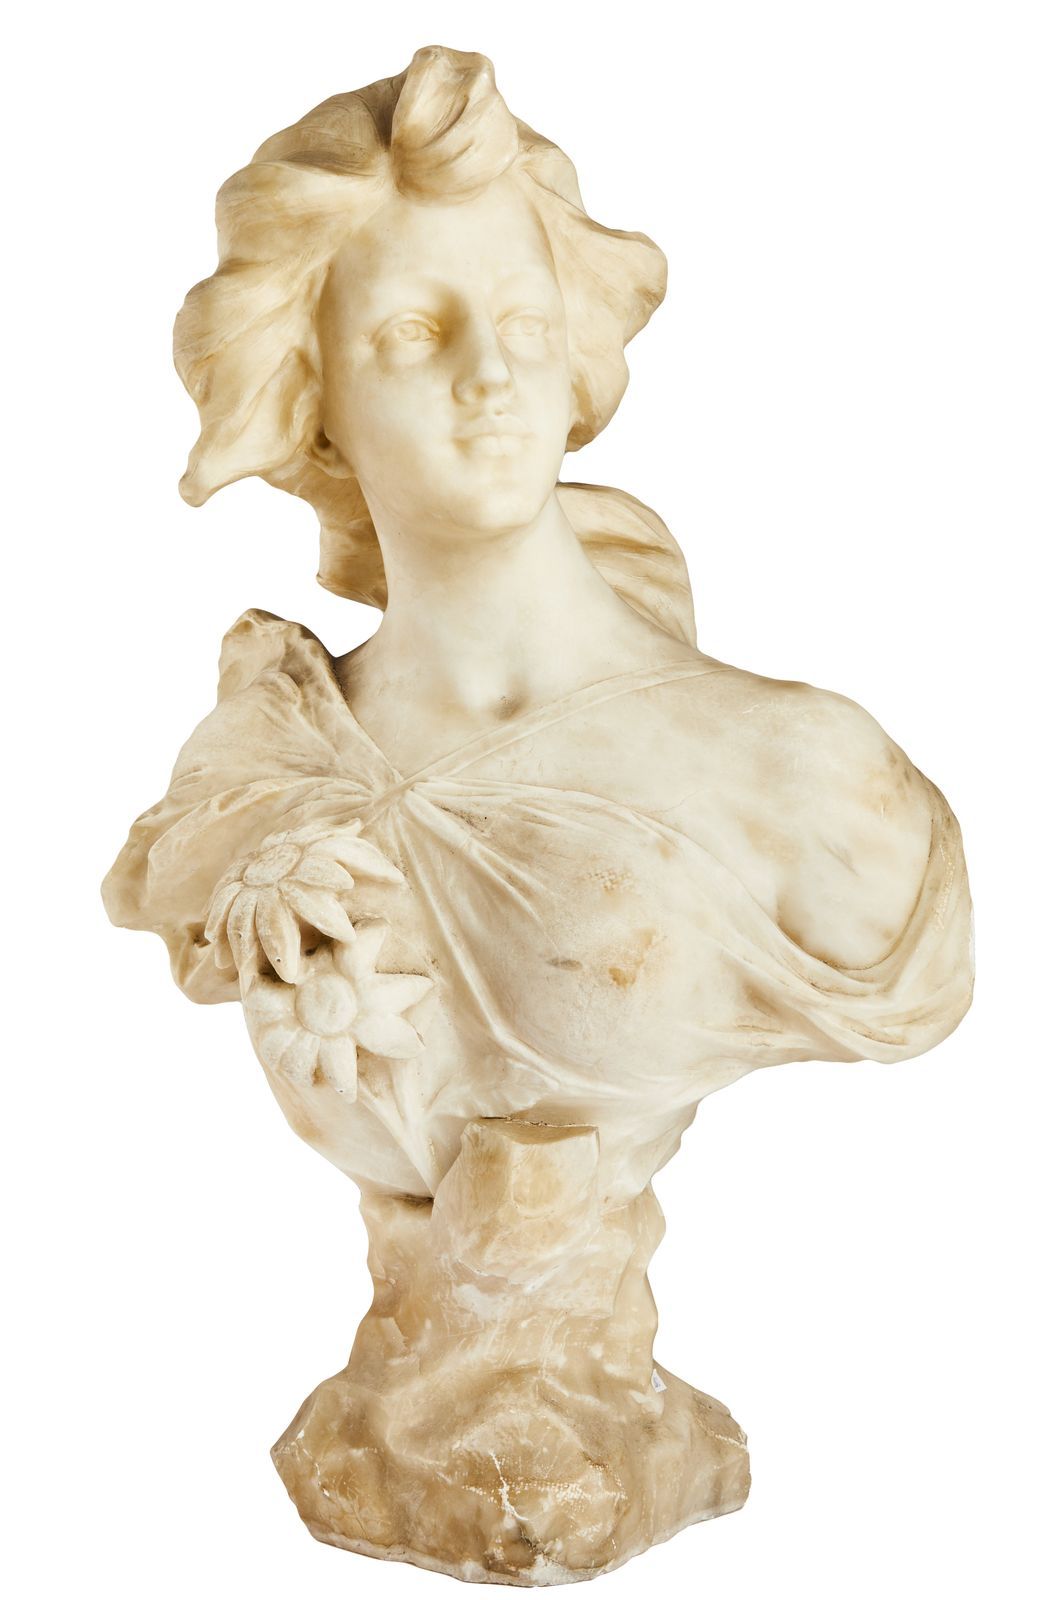 Null 92-Dante Zoi (1880-1920)

Bust of a young girl

Alabaster

Signed and locat&hellip;